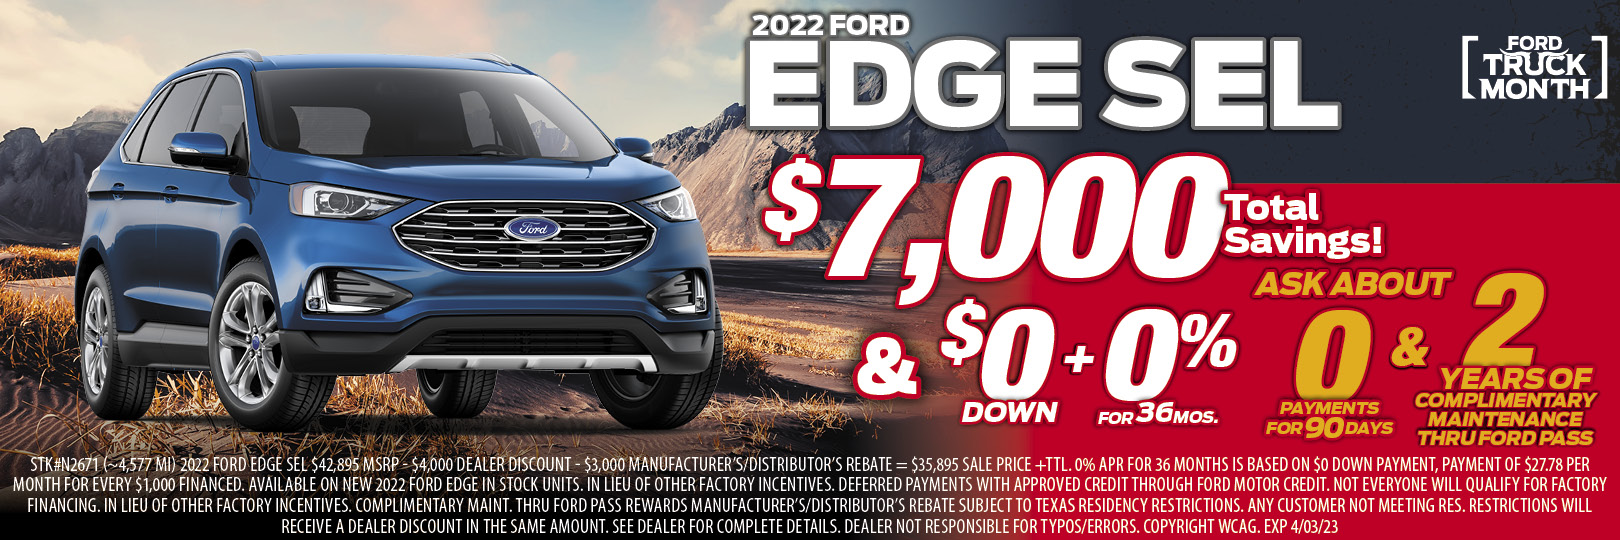 Ford Edge Special near me in Houston Spring The Woodlands